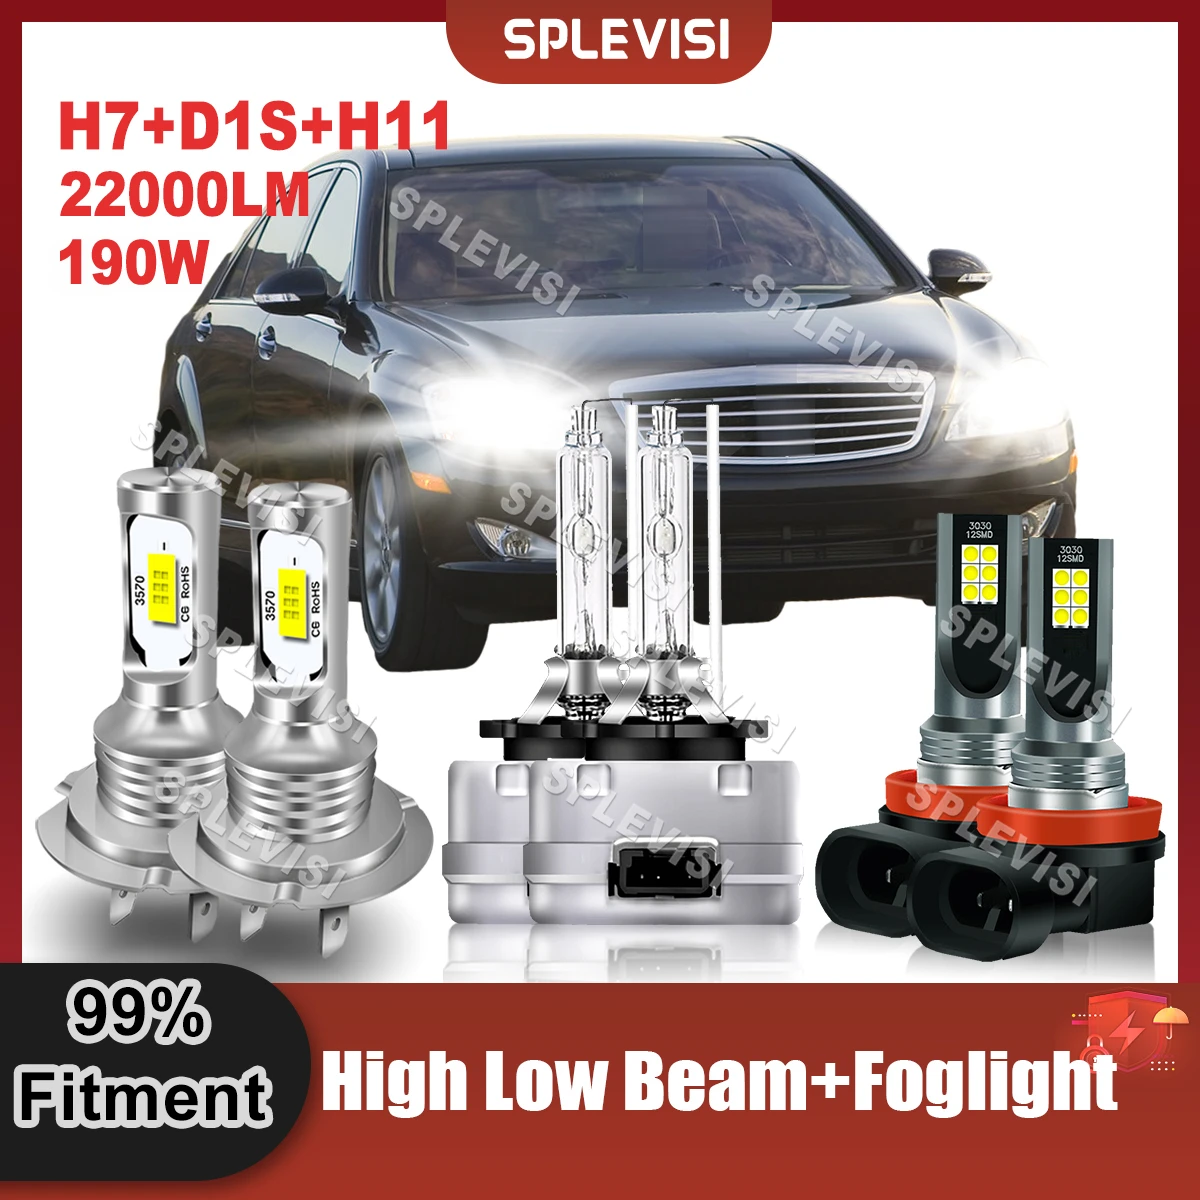 

Replace LED Headlight Bulbs H7 High Beam+D1S Xenon Low Beam+H11 Foglamp Combo Kit For Mercedes-Benz S550 2007 2008 2009 2010